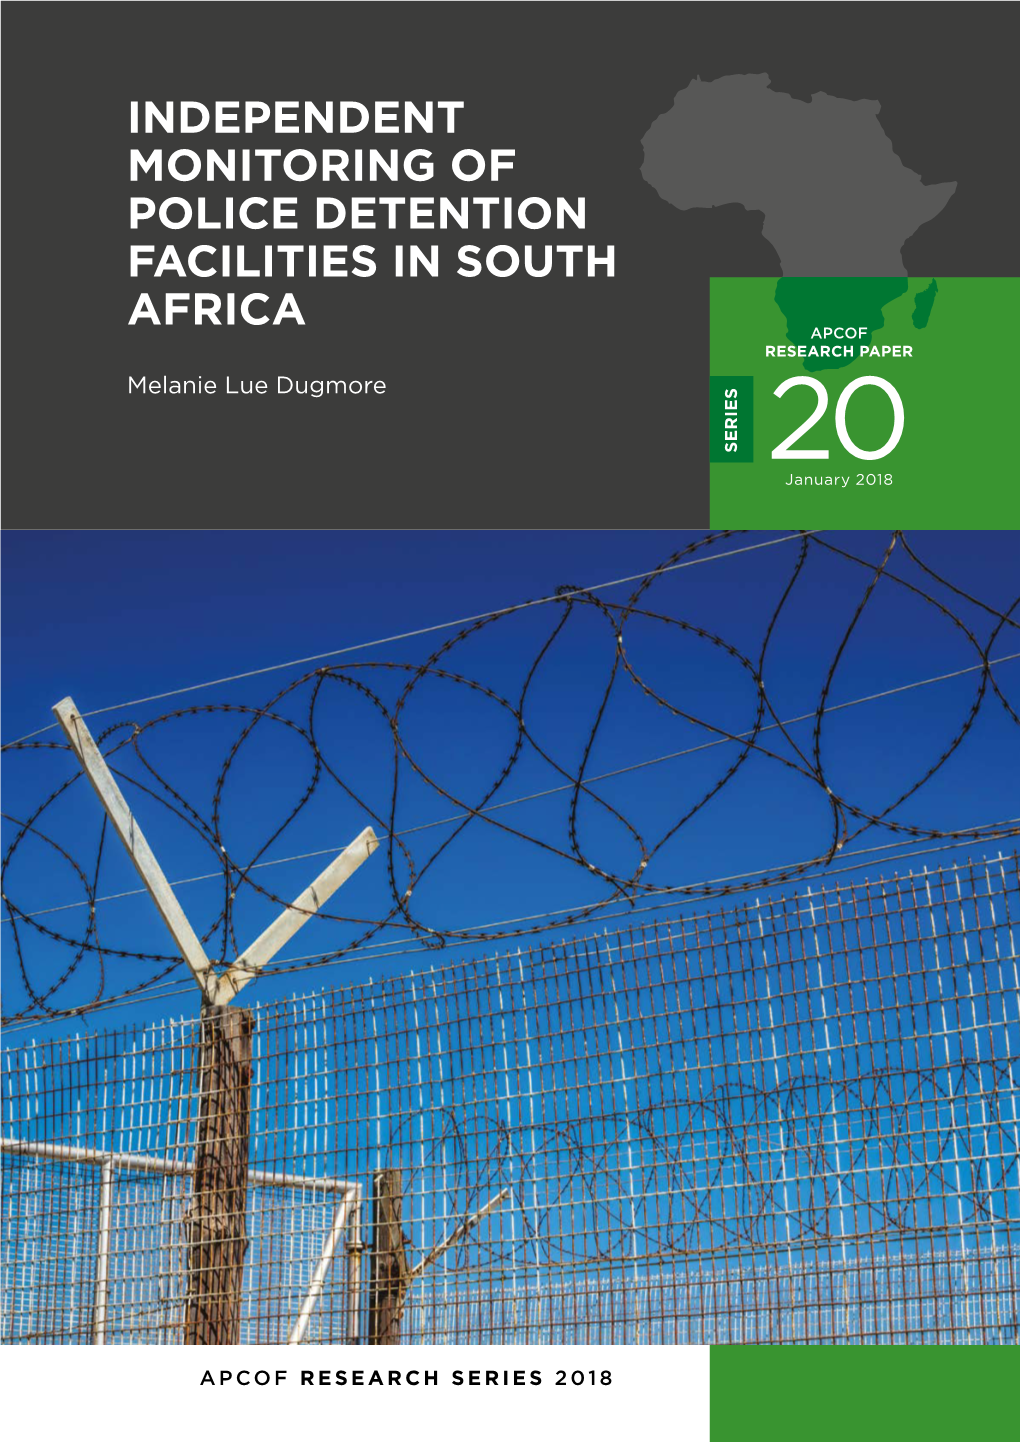 Police Detention Facilities in South Africa